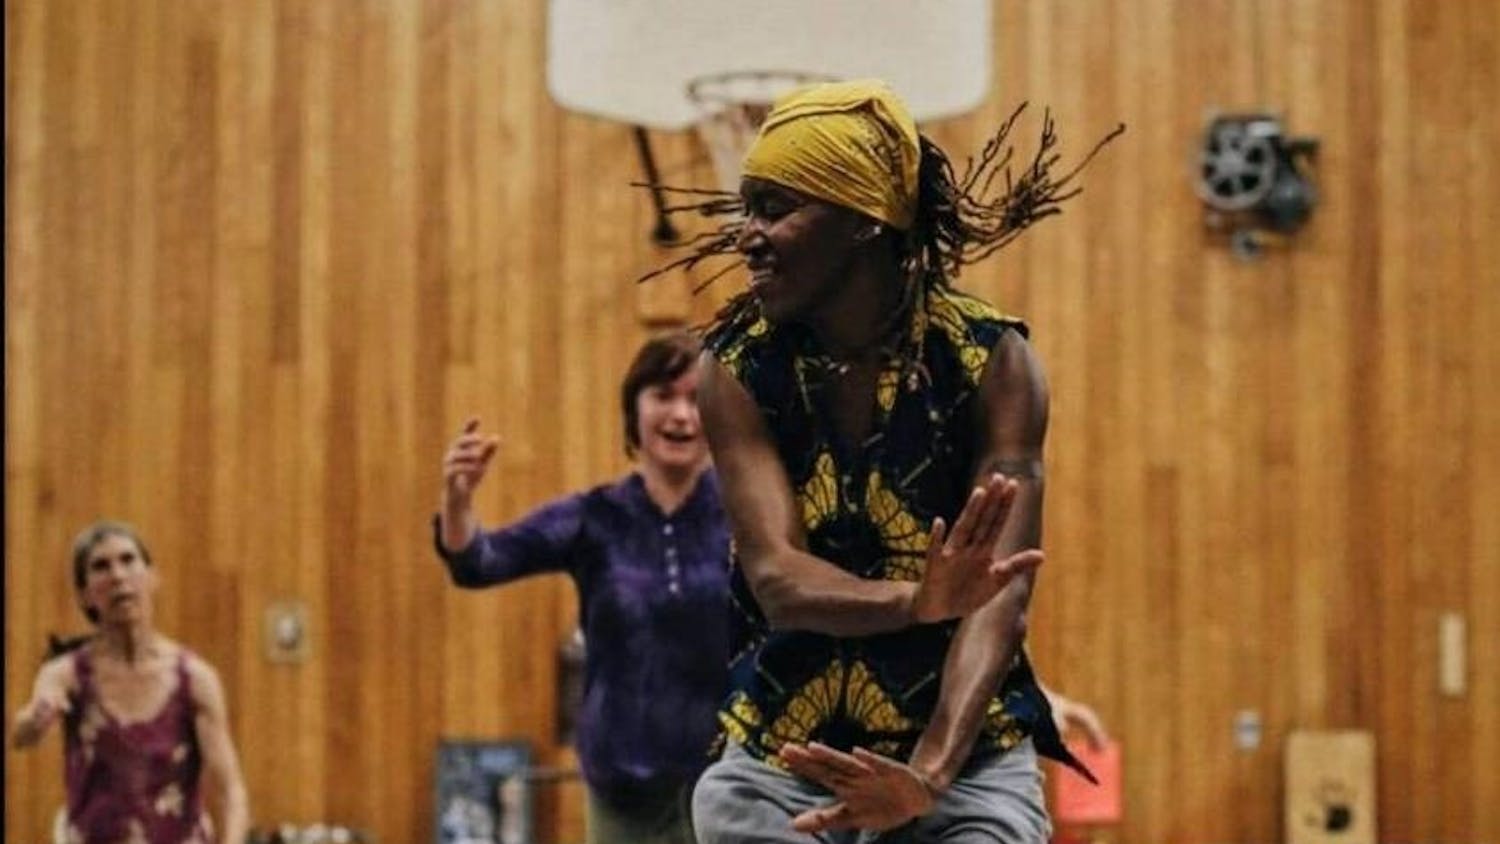 Barakissa Couliaby, 42, professional dancer, performs a West African dance routine at the Asheville Percussion Festival in North Carolina on July 1, 2017.